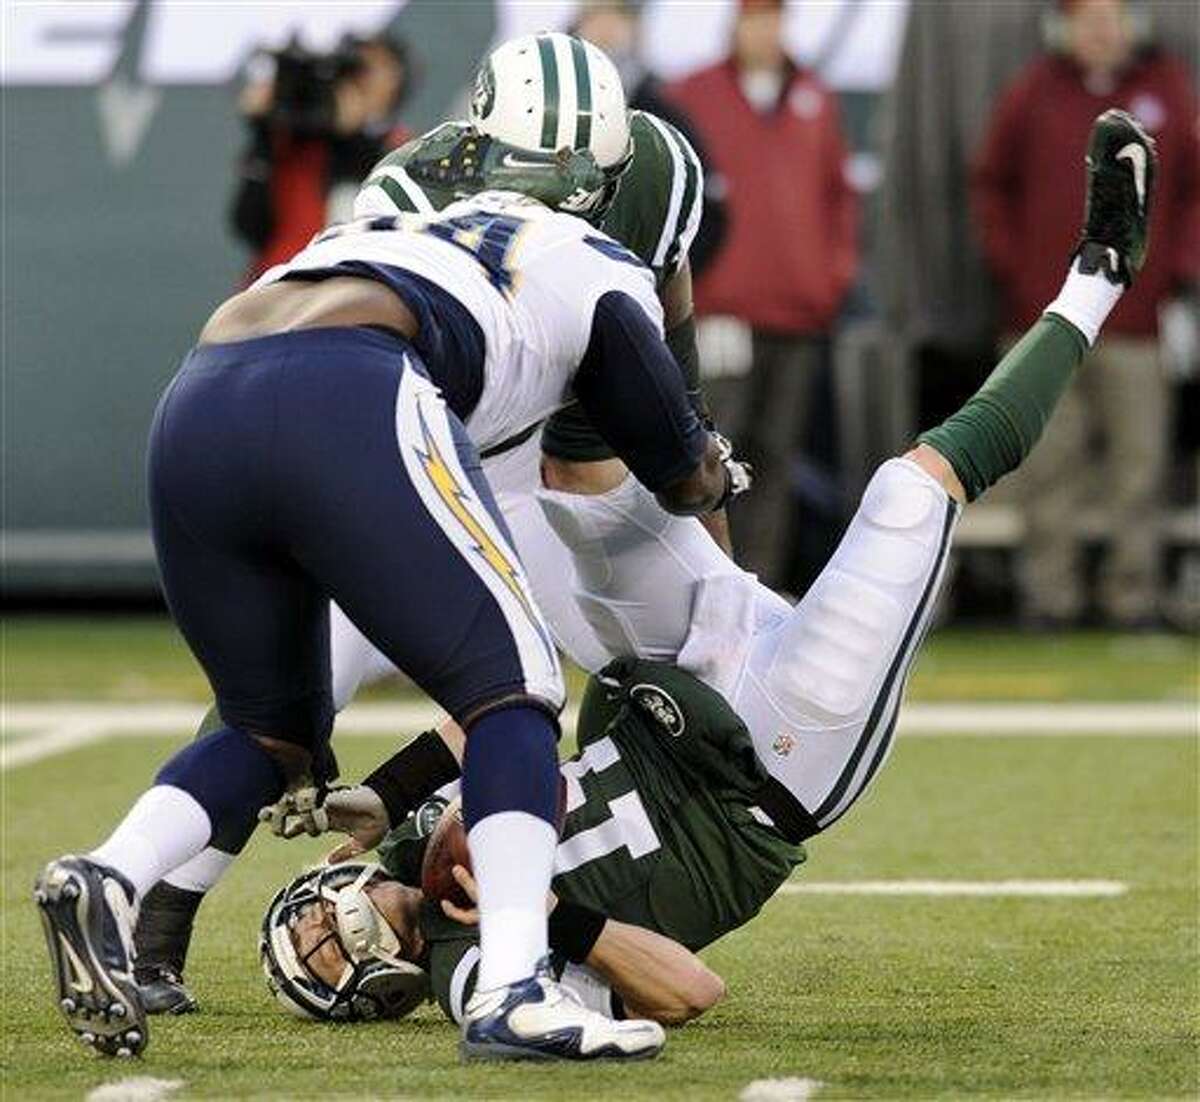 FILE - In this Dec. 23, 2012, file photo, New York Jets quarterback Greg McElroy, bottom, is sacked by San Diego Chargers defensive end Corey Liuget, front left, during the second half of an NFL football game in East Rutherford, N.J. McElroy, who was sacked 11 times last weekend, has a concussion and will be replaced by Mark Sanchez as the Jets' starting quarterback in the season finale at Buffalo on Sunday, coach Rex Ryan said. (AP Photo/Bill Kostroun, File)